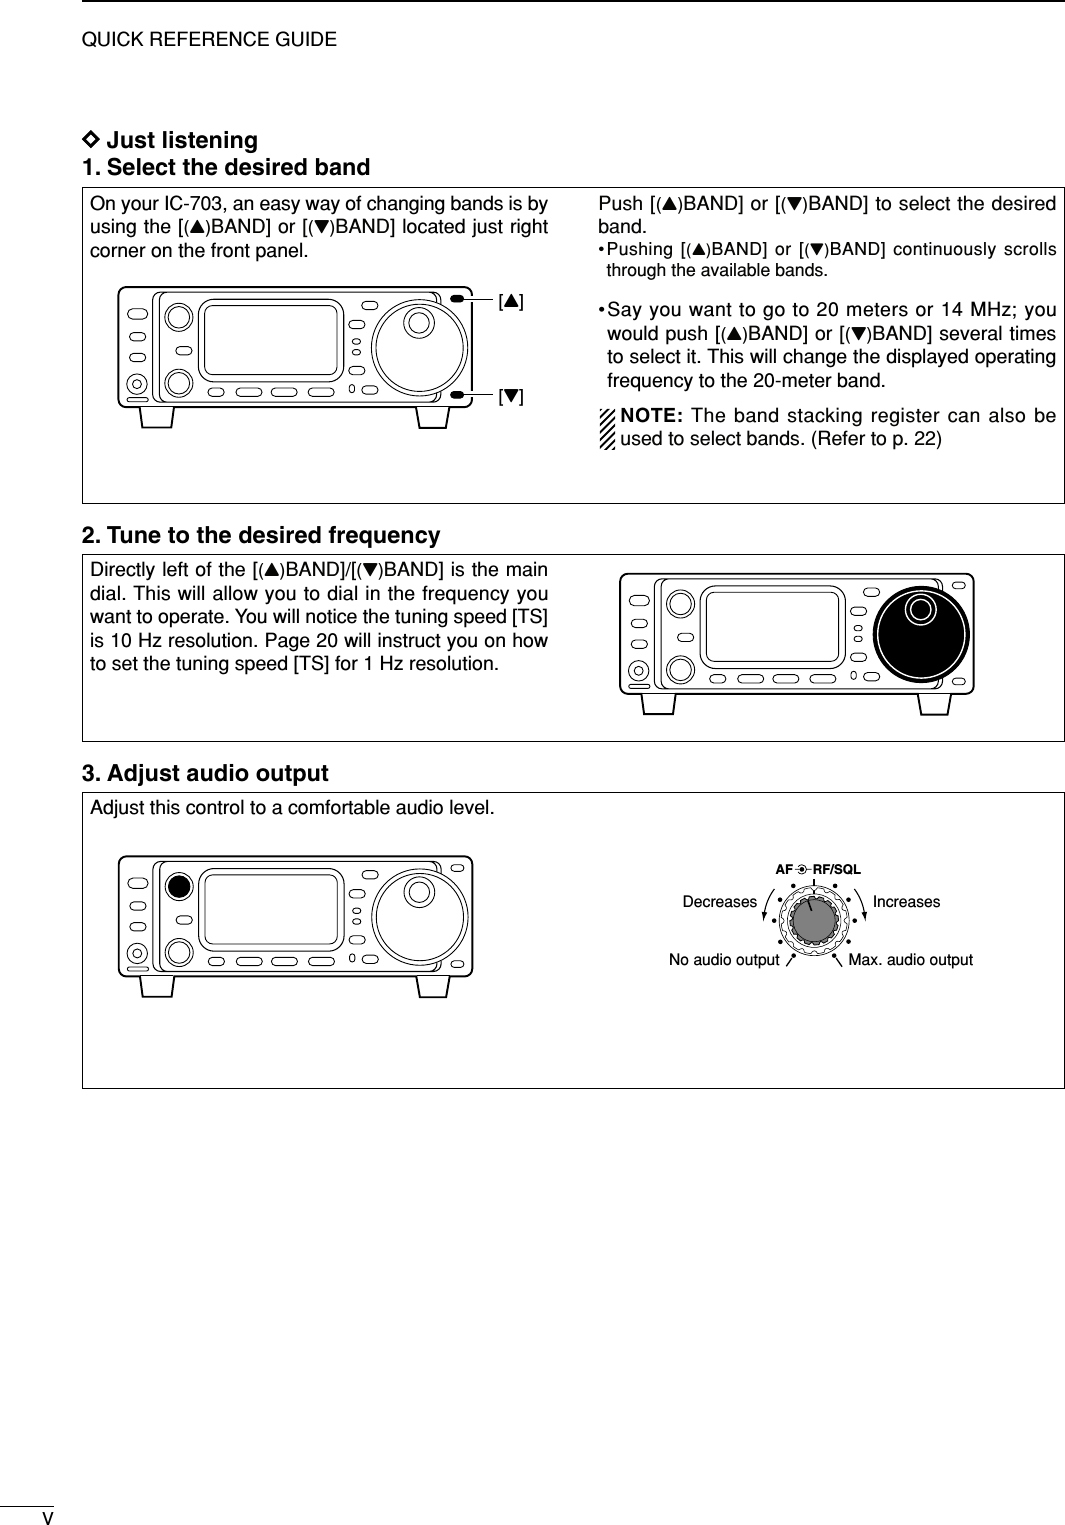 VQUICK REFERENCE GUIDEDJust listening1. Select the desired band 3. Adjust audio outputOn your IC-703, an easy way of changing bands is byusing the [(Y)BAND] or [(Z)BAND] located just rightcorner on the front panel.Push [(Y)BAND] or [(Z)BAND] to select the desiredband.•Pushing [(Y)BAND] or [(Z)BAND] continuously scrollsthrough the available bands.•Say you want to go to 20 meters or 14 MHz; youwould push [(Y)BAND] or [(Z)BAND] several timesto select it. This will change the displayed operatingfrequency to the 20-meter band.NOTE: The band stacking register can also beused to select bands. (Refer to p. 22)[Y][Z]Directly left of the [(Y)BAND]/[(Z)BAND] is the maindial. This will allow you to dial in the frequency youwant to operate. You will notice the tuning speed [TS]is 10 Hz resolution. Page 20 will instruct you on howto set the tuning speed [TS] for 1 Hz resolution.Adjust this control to a comfortable audio level.AF RF/SQLNo audio output Max. audio outputDecreases Increases2. Tune to the desired frequency